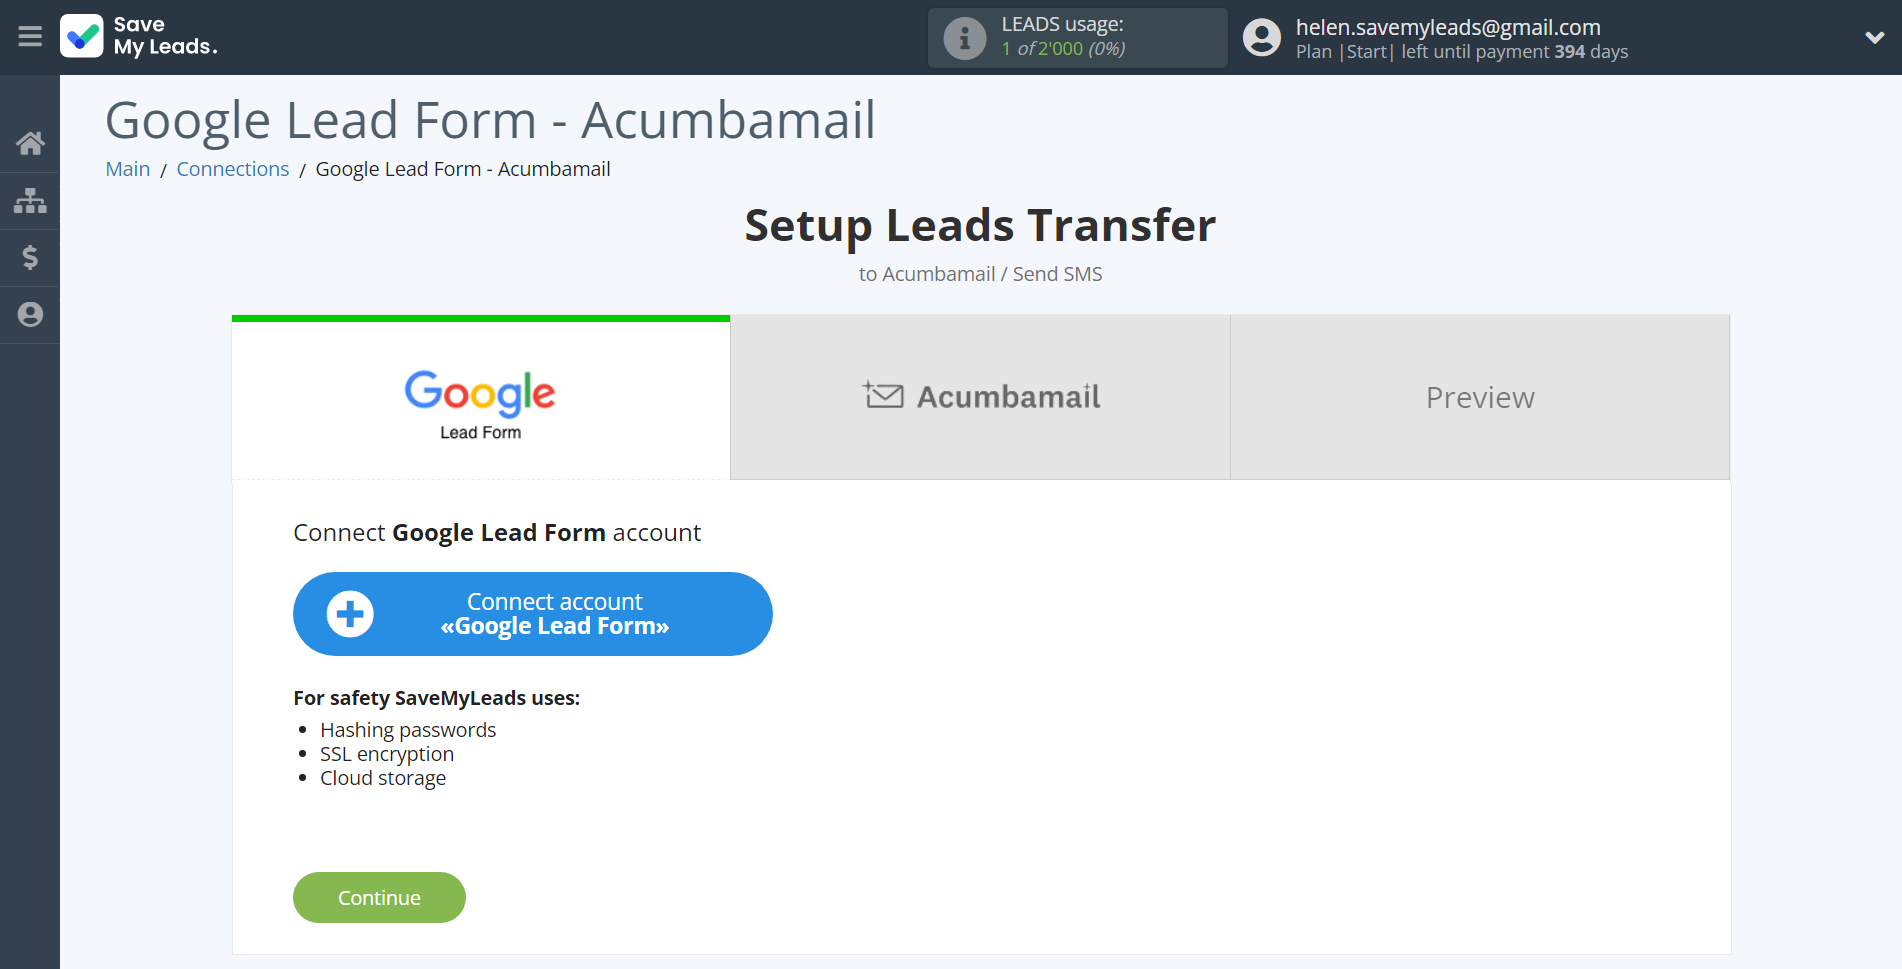 How to Connect Google Lead Form with Acumbamail Send SMS | Data Source account